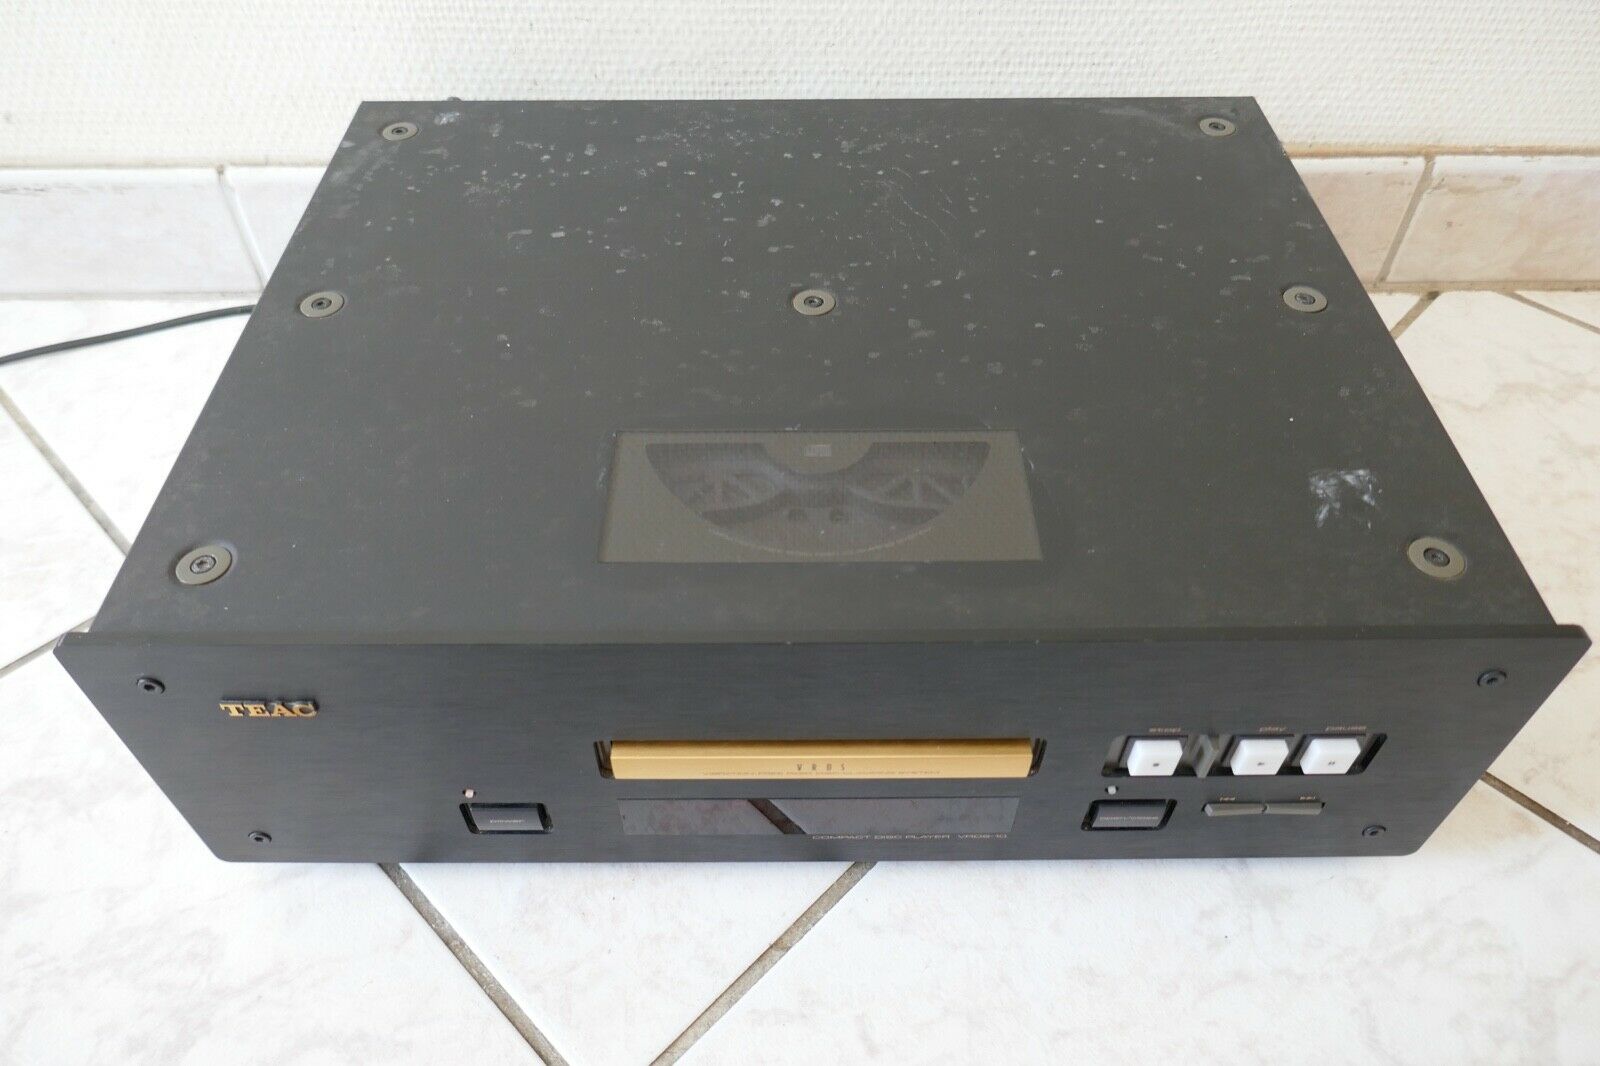 lecteur cd compact disc player teac VRDS-10 vintage occasion